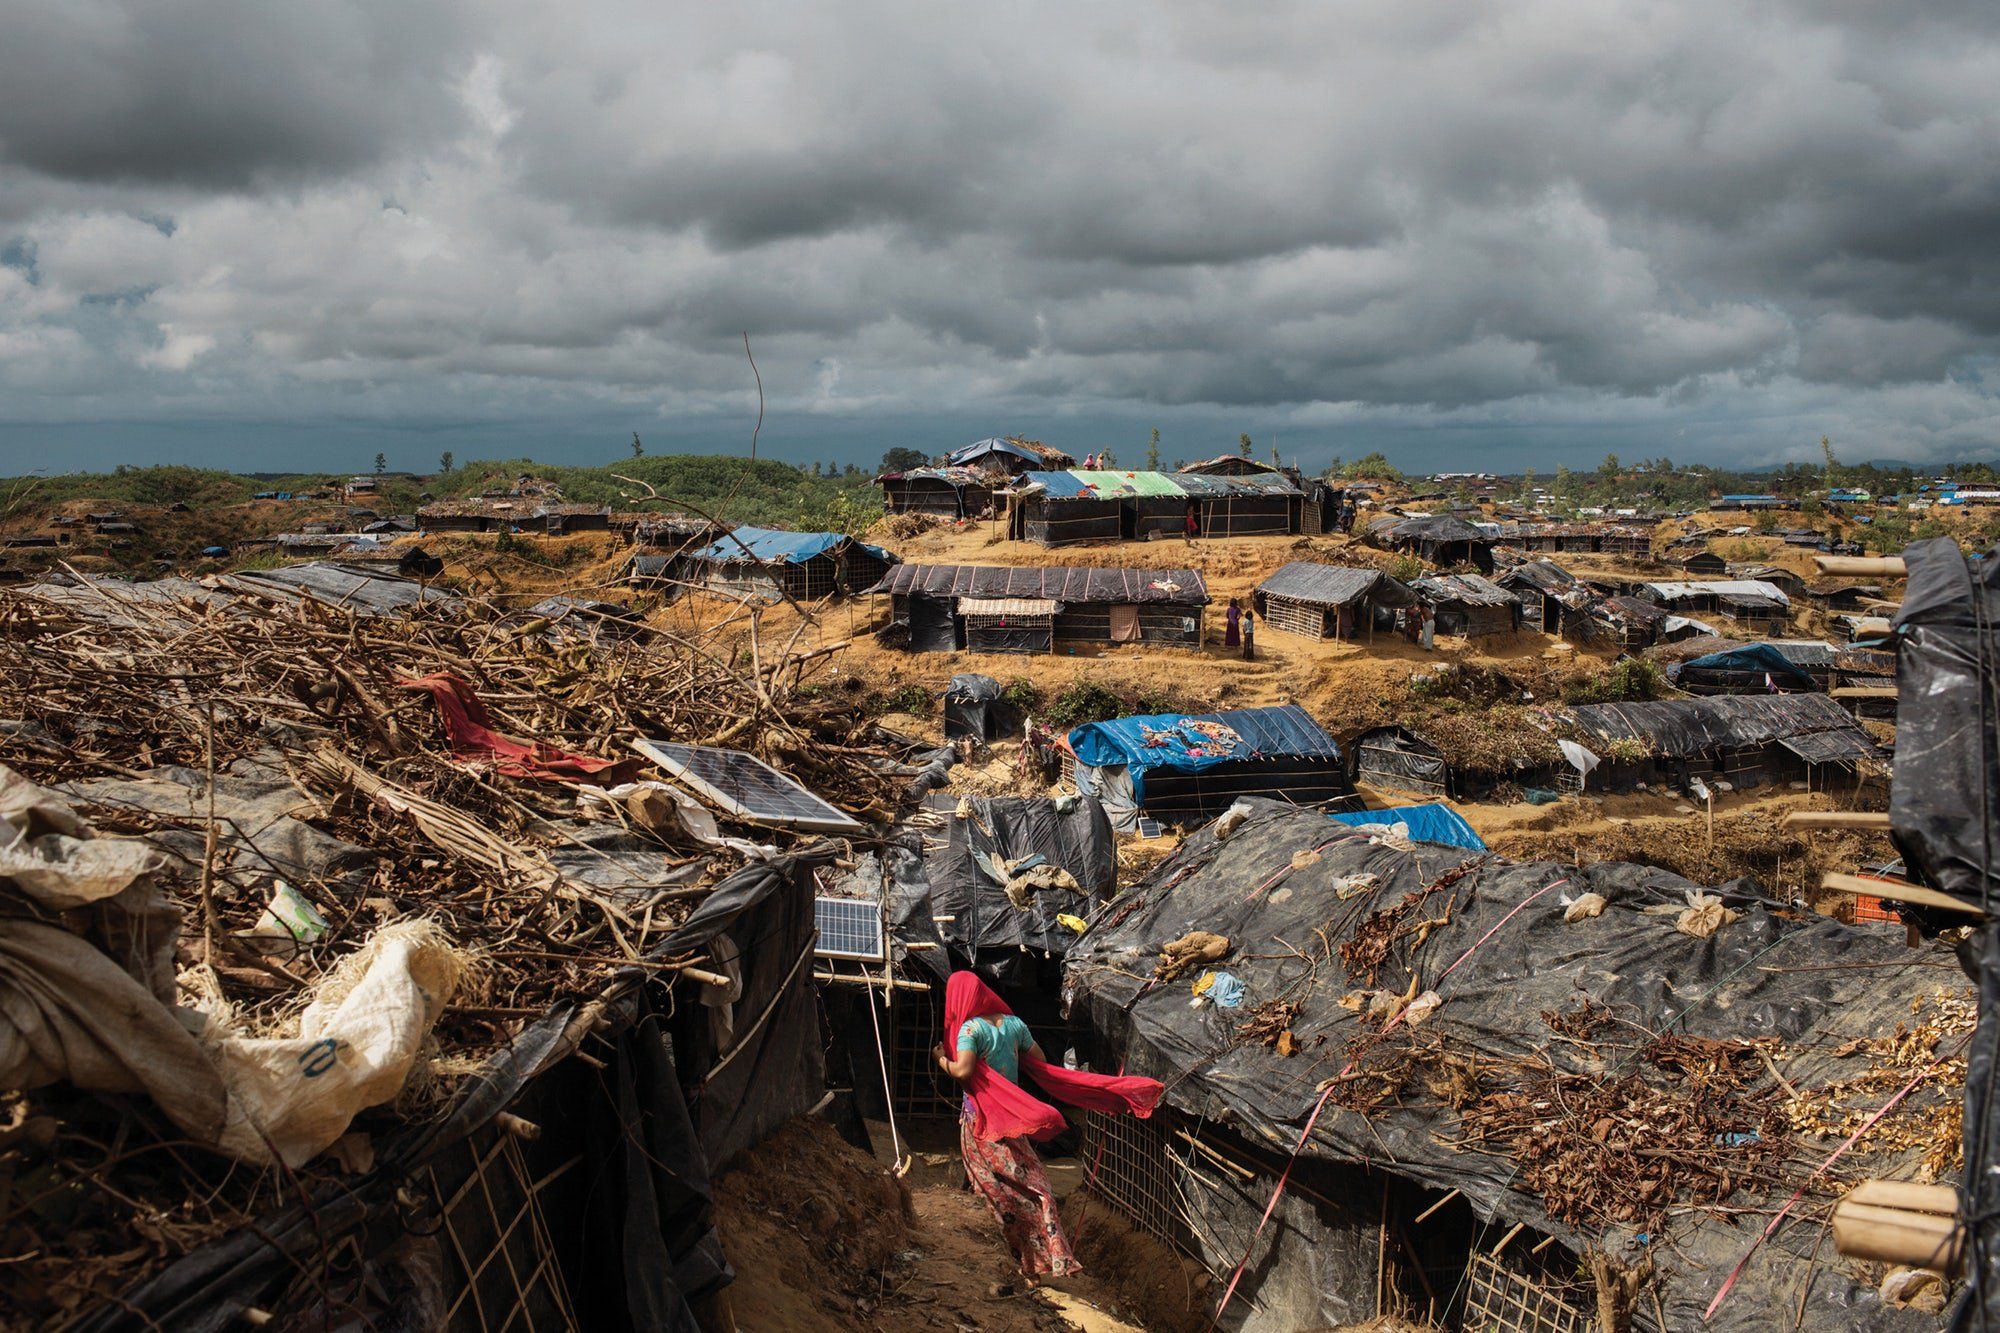 Thousands of Rohingya Muslims have been driven into cramped and squalid refugee camps in southern Bangladesh. Image by Pietro Masturzo. Bangladesh, 2017.